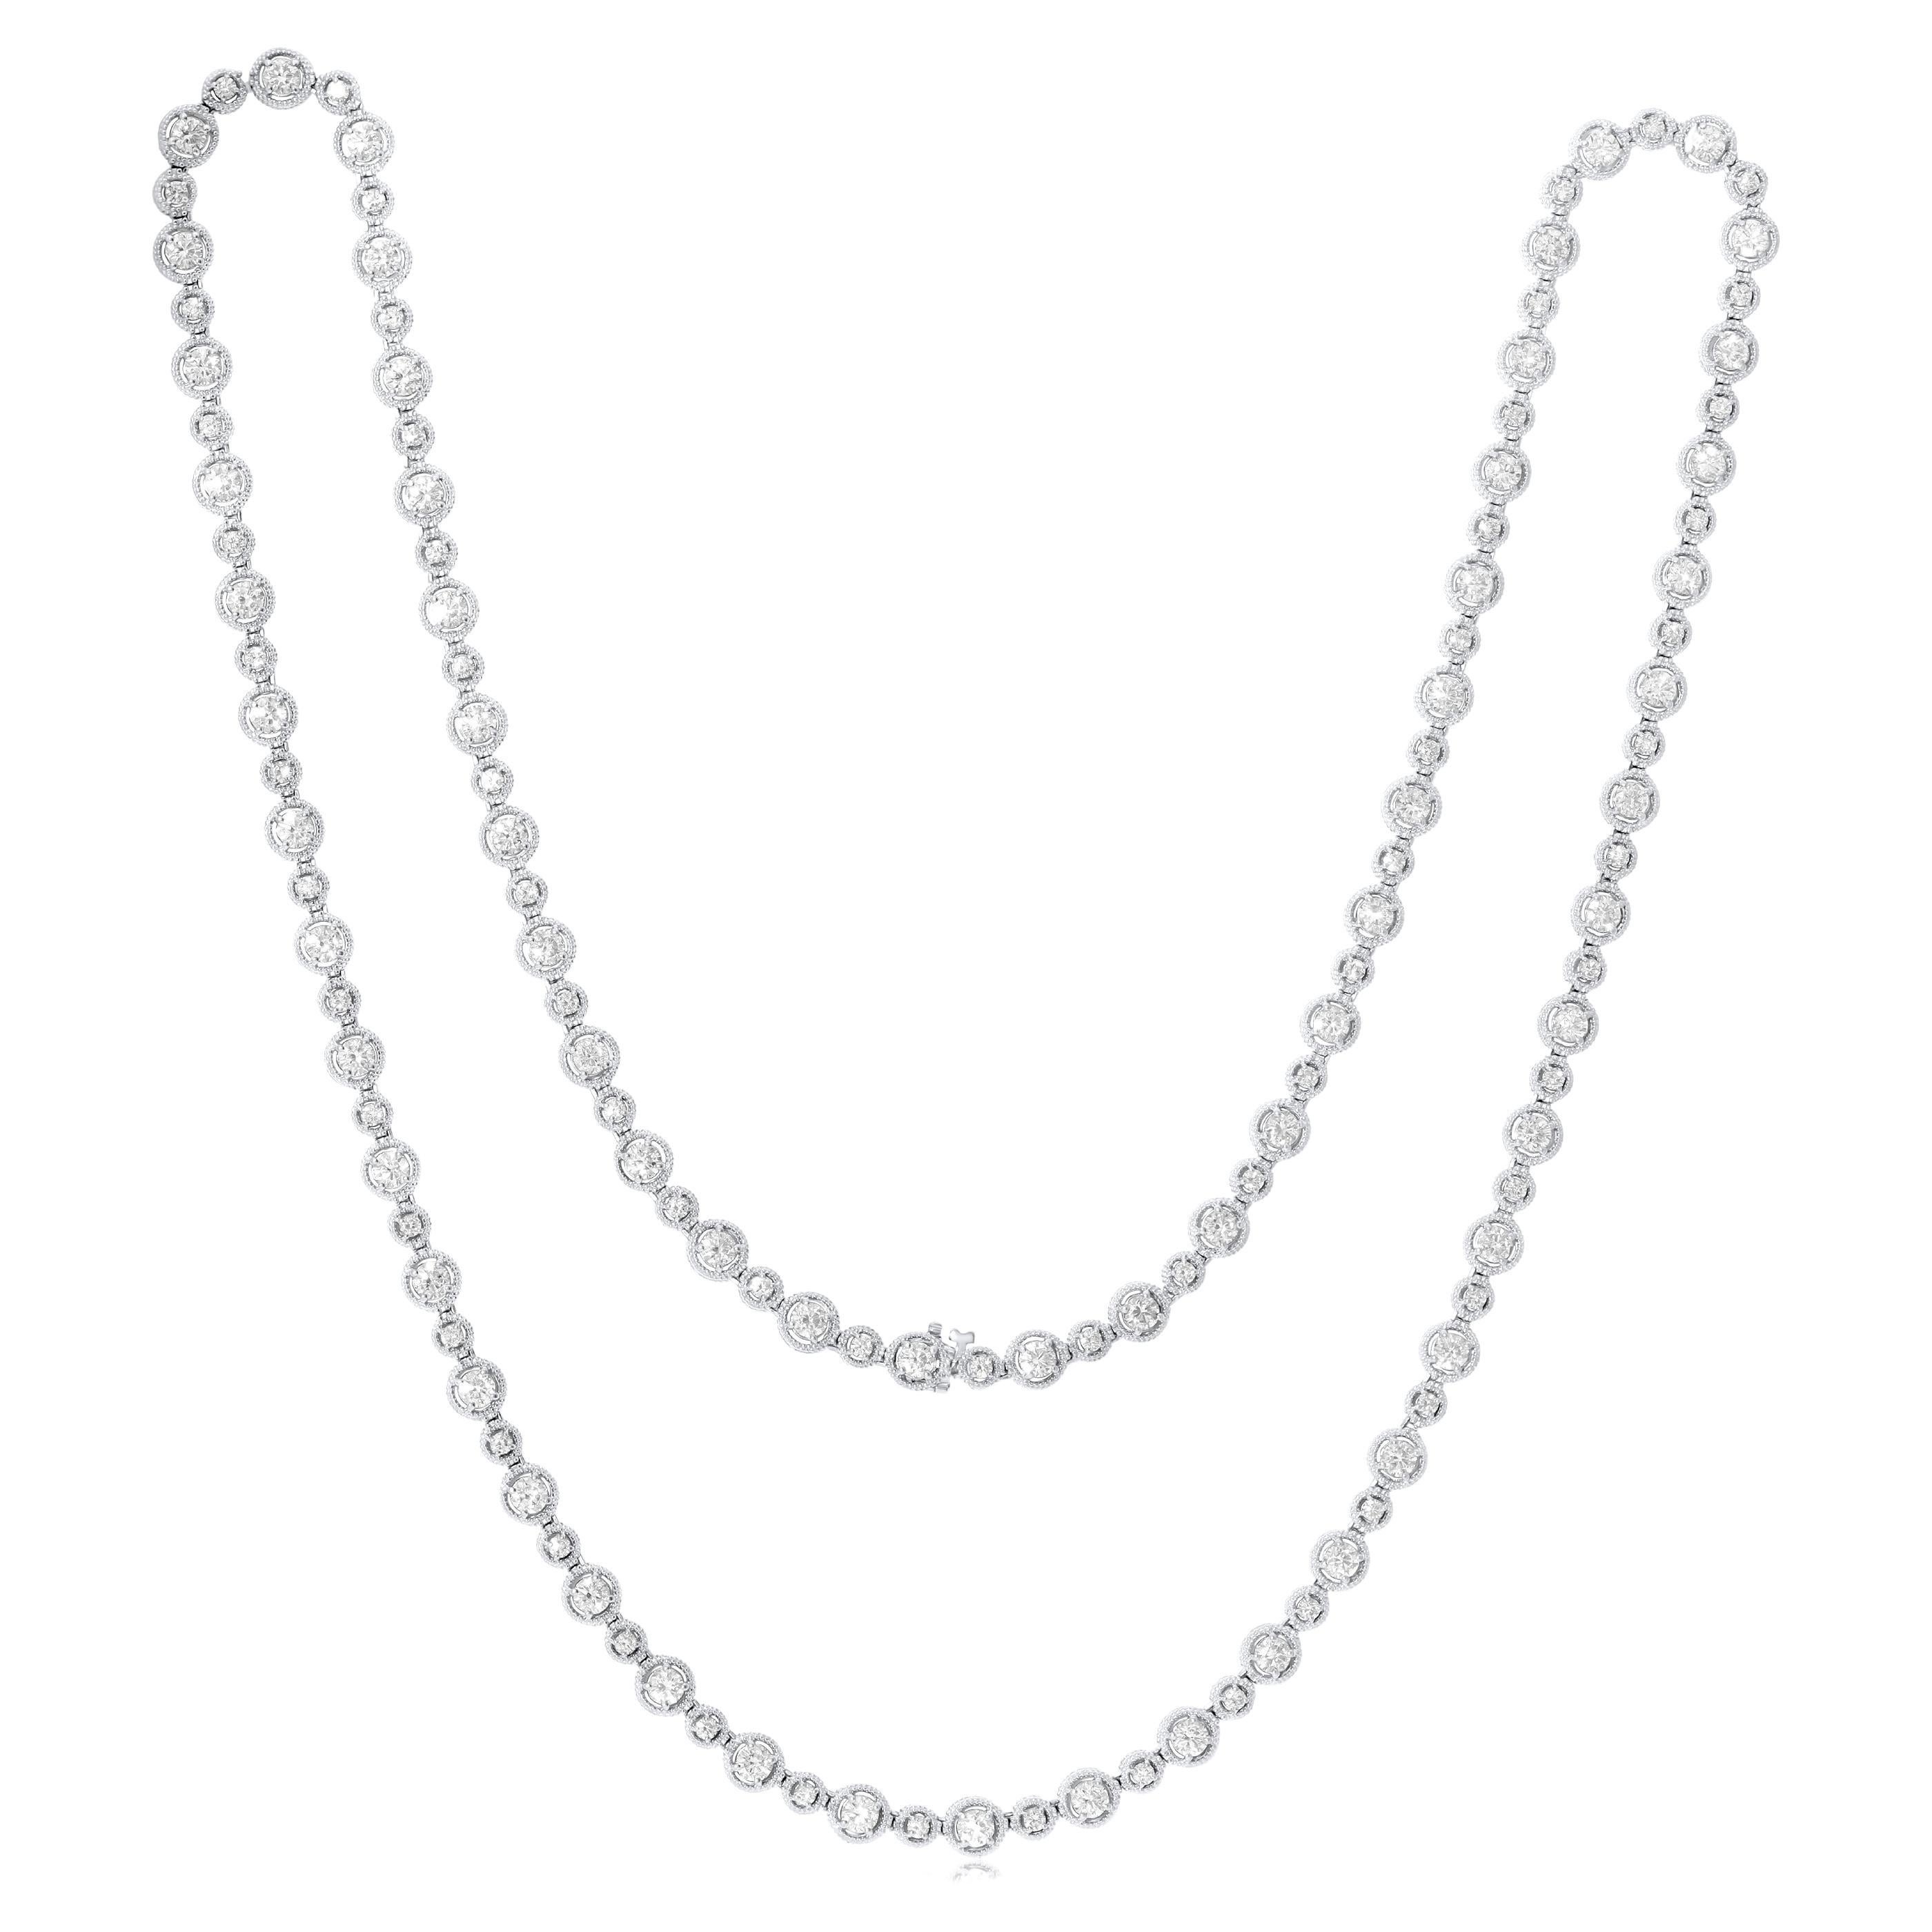 Diana M. Custom 18.10 cts Round Diamond 32" 18k White Gold Necklace  For Sale